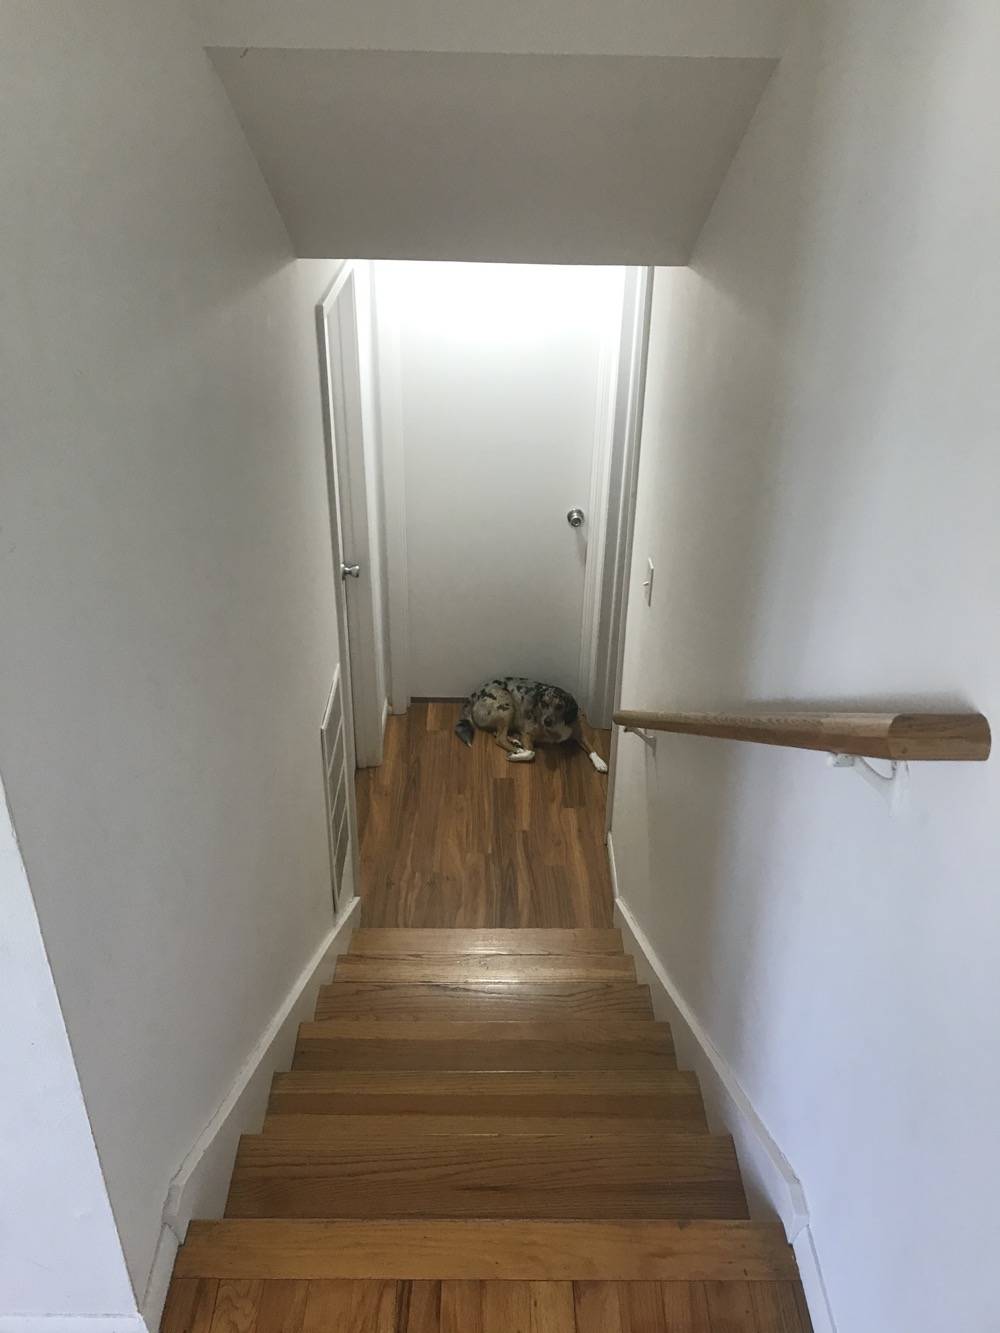 IMAGE: View from the top of a set of stairs, a dog sits at the bottom of the landing next to a closed white door. There's a hand railing on the right side of the image. Photo by Patrick Singer.